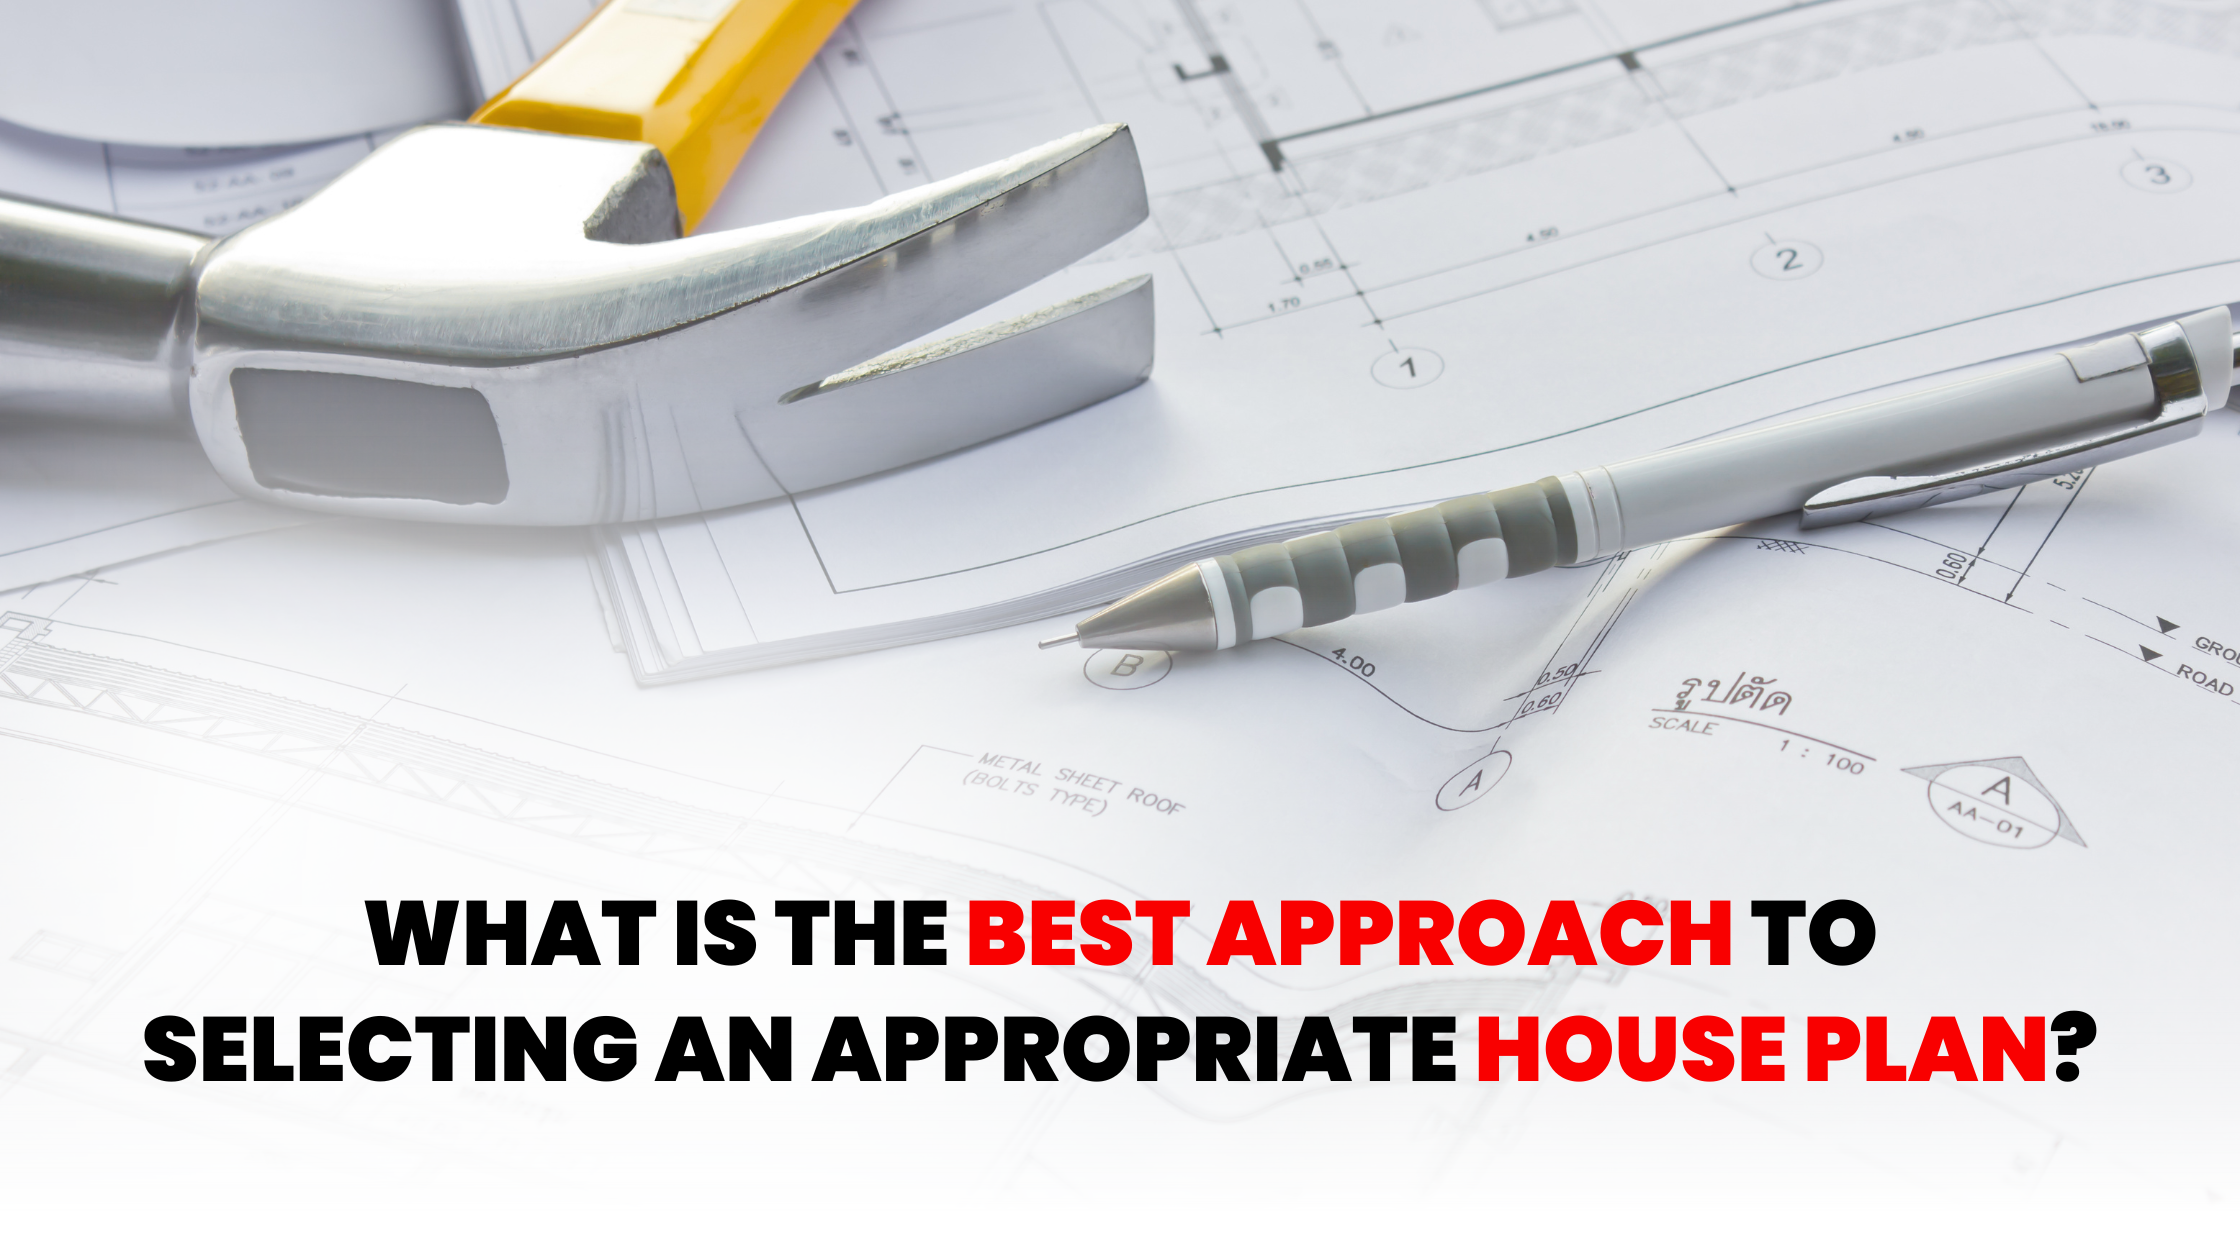 What is the best approach to selecting an appropriate house plan?